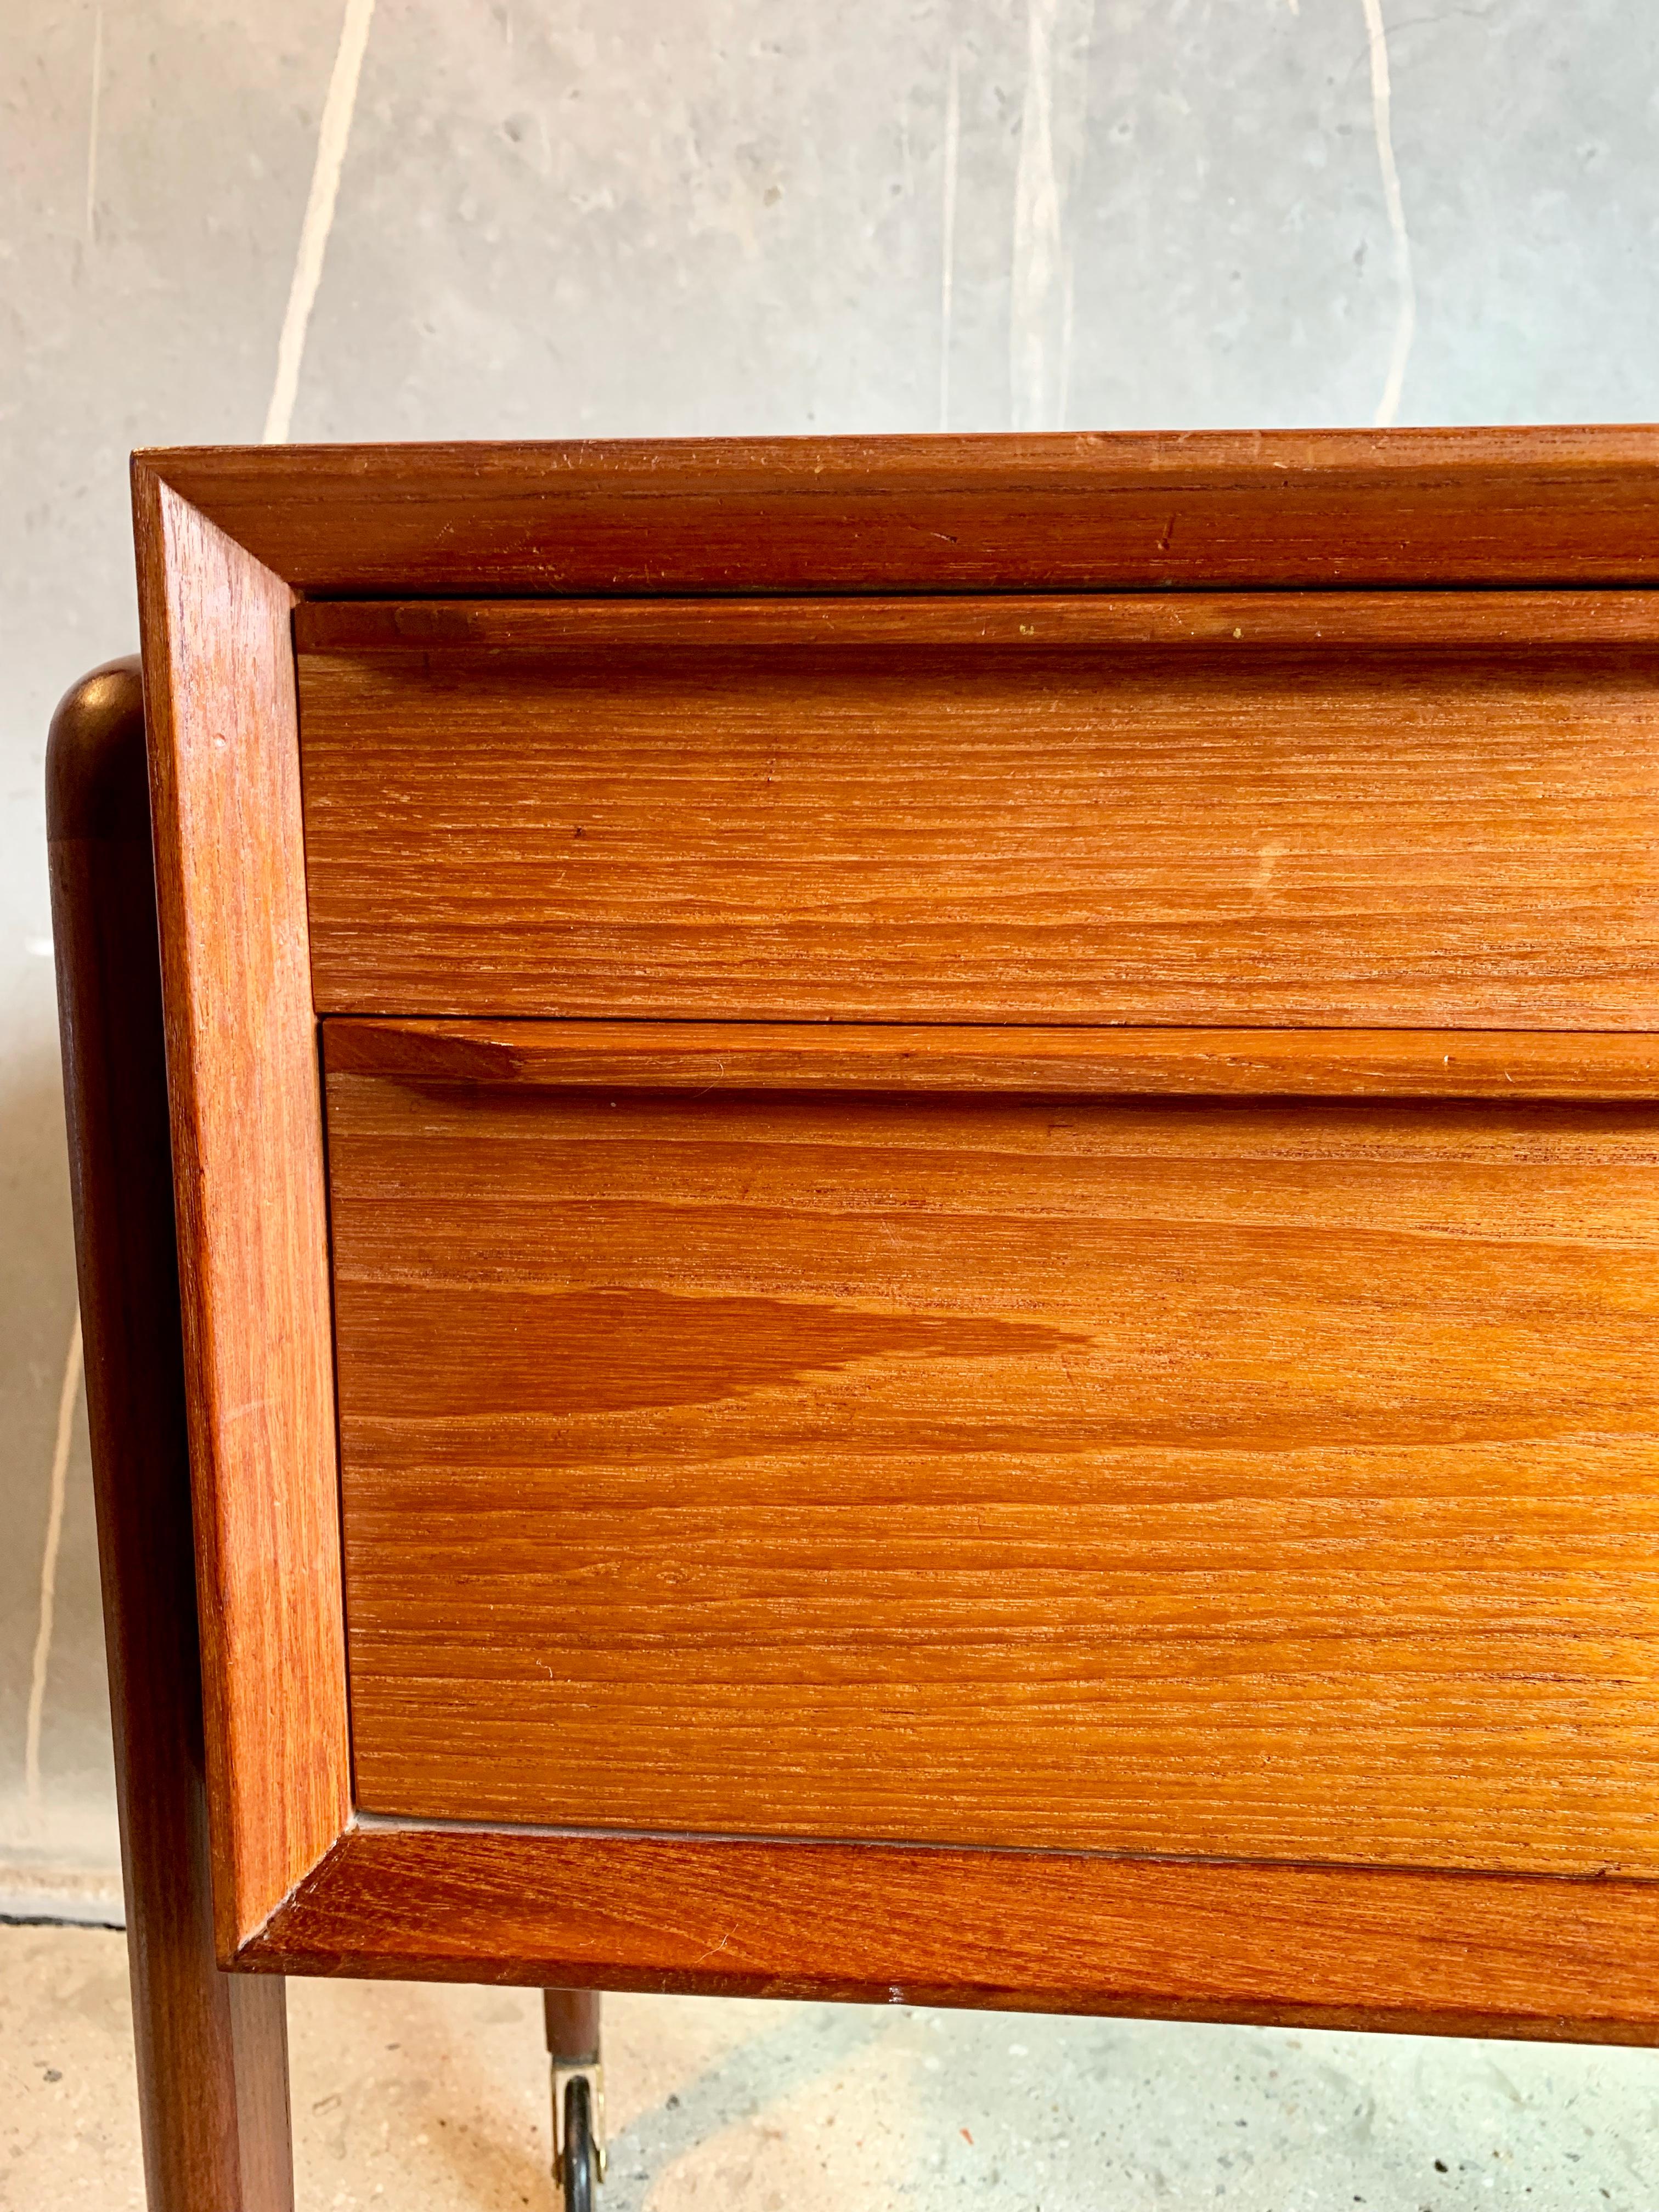 Chest made of teak, designed by Arne Vodder, featuring four drawers and wheels made of brass. Good Danish craftsmanship.